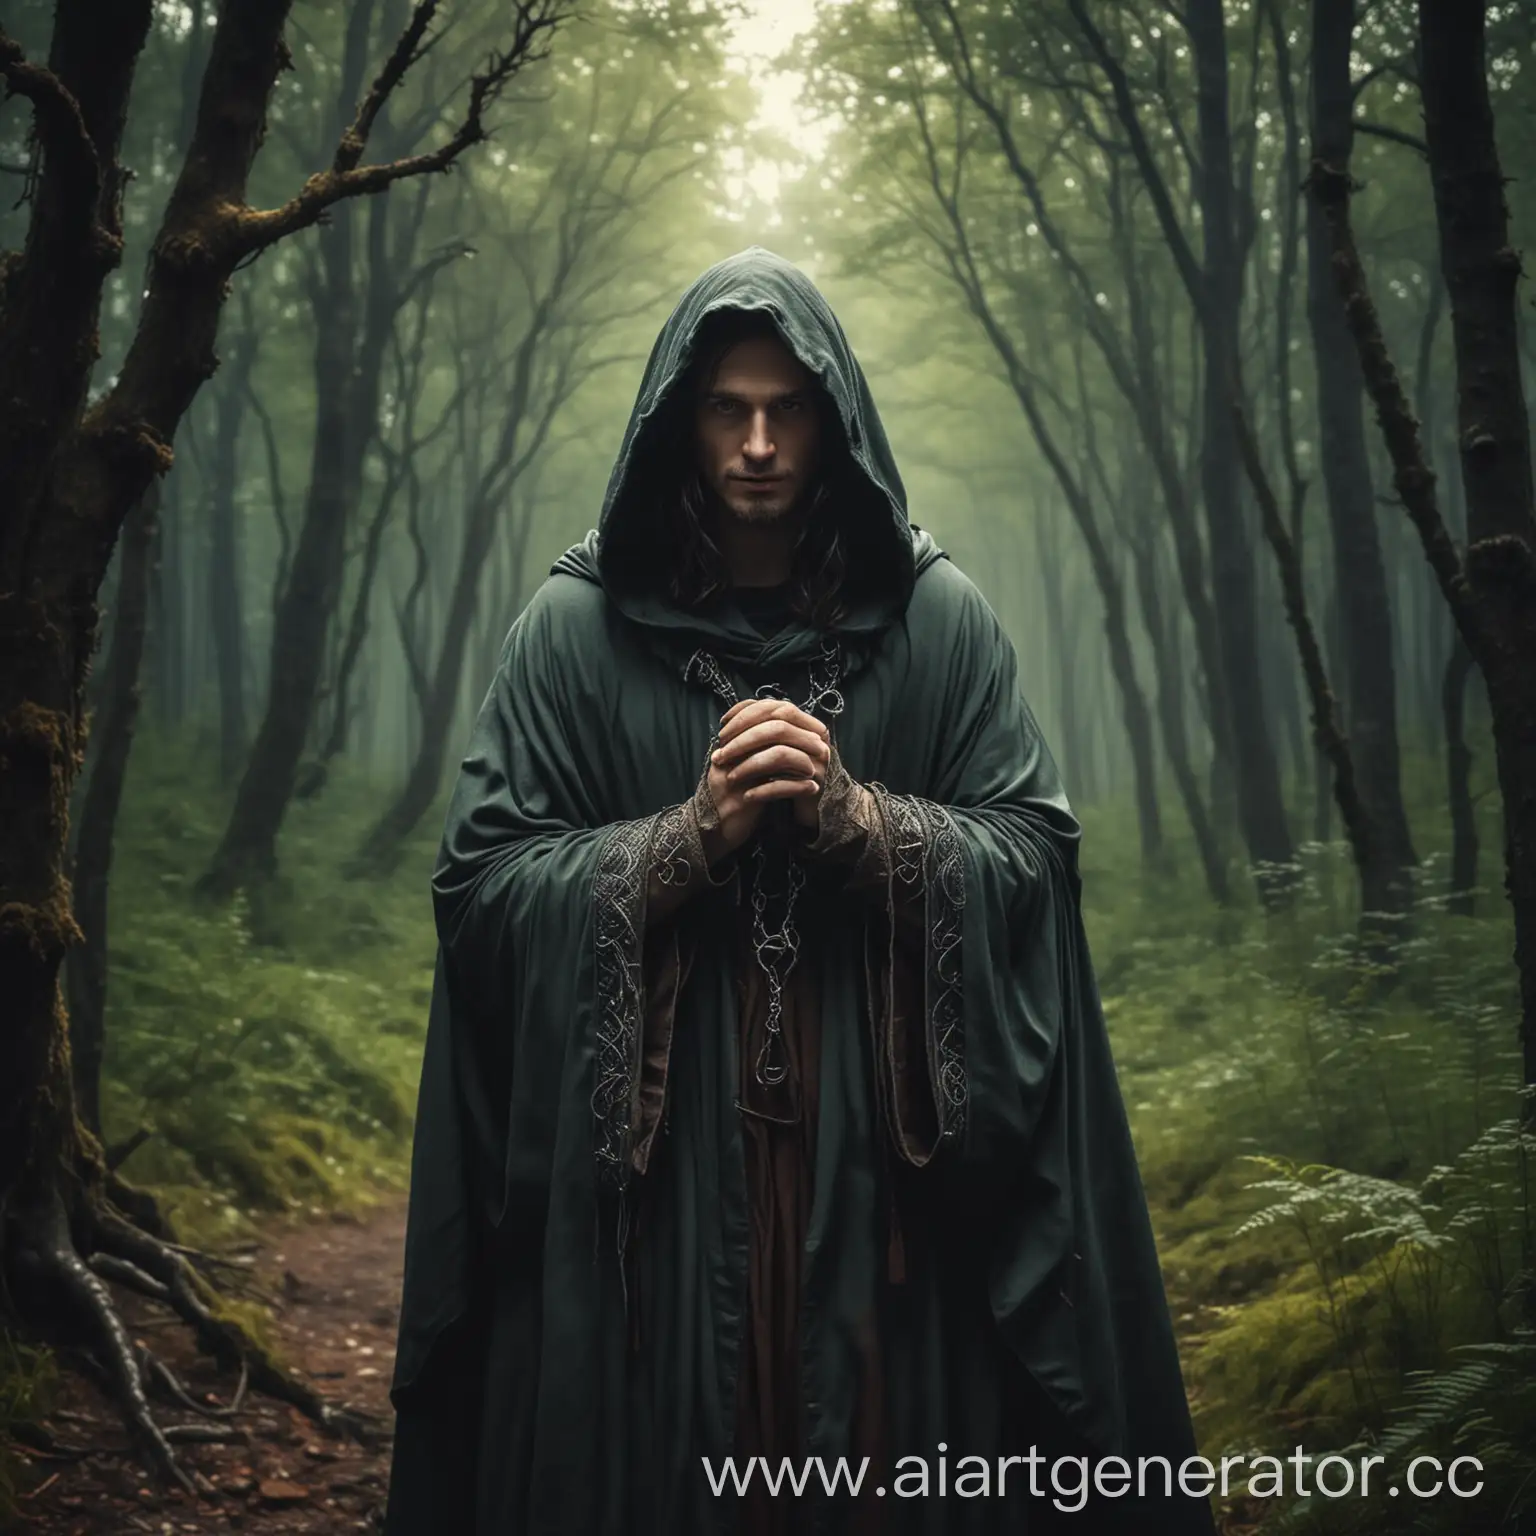 Fantasy-Druid-in-Hooded-Cloak-Amidst-Enchanted-Forest